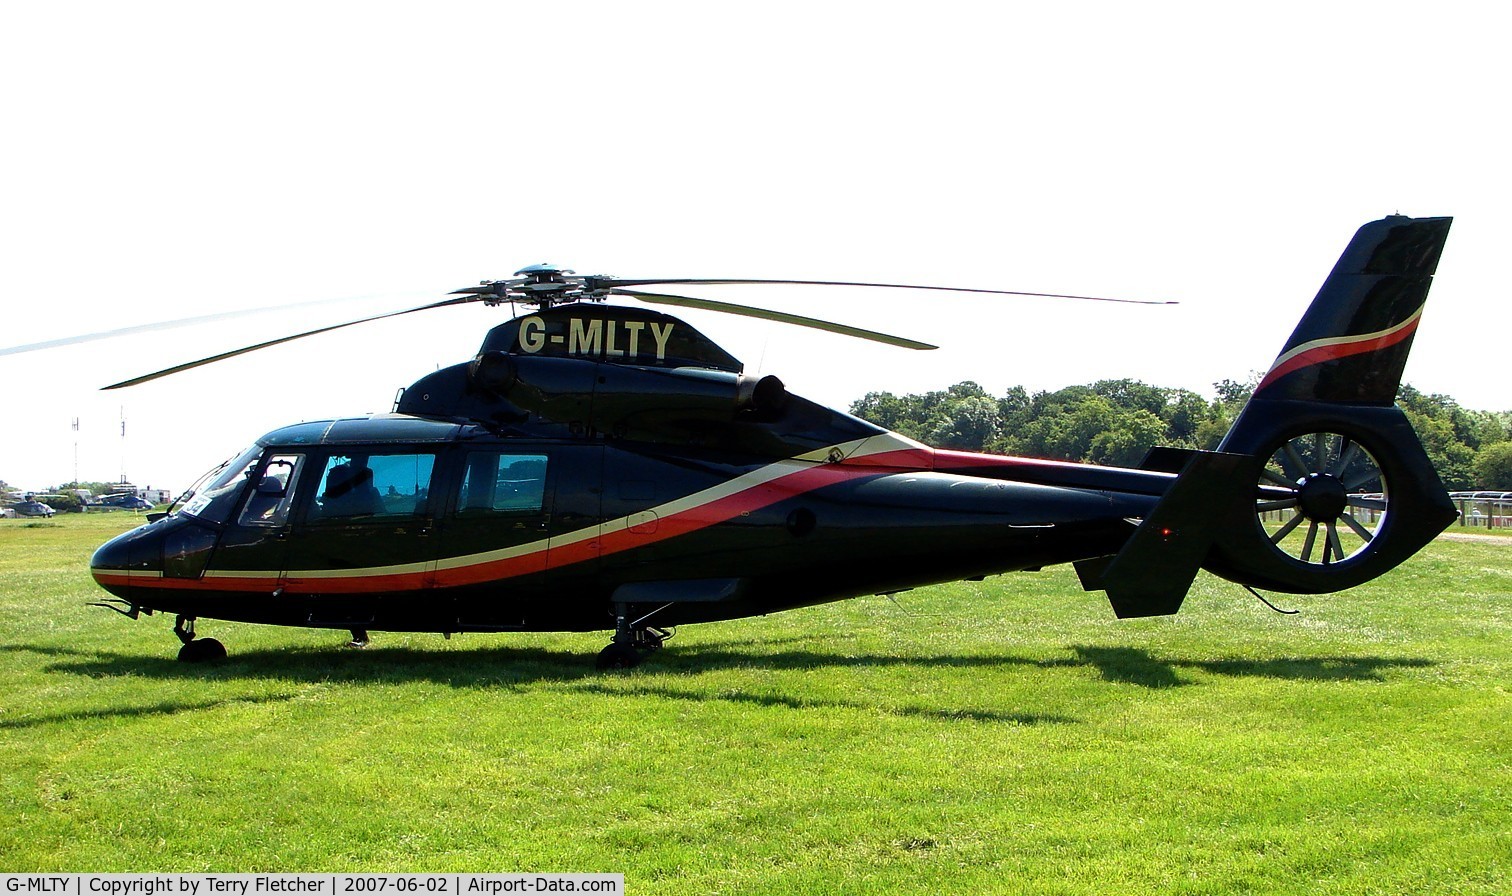 G-MLTY, 1991 Aerospatiale AS-365N-2 Dauphin C/N 6431, Helicopters arrive at the temporary Heliport on 2007 Epsom Derby Day (Horse racing)